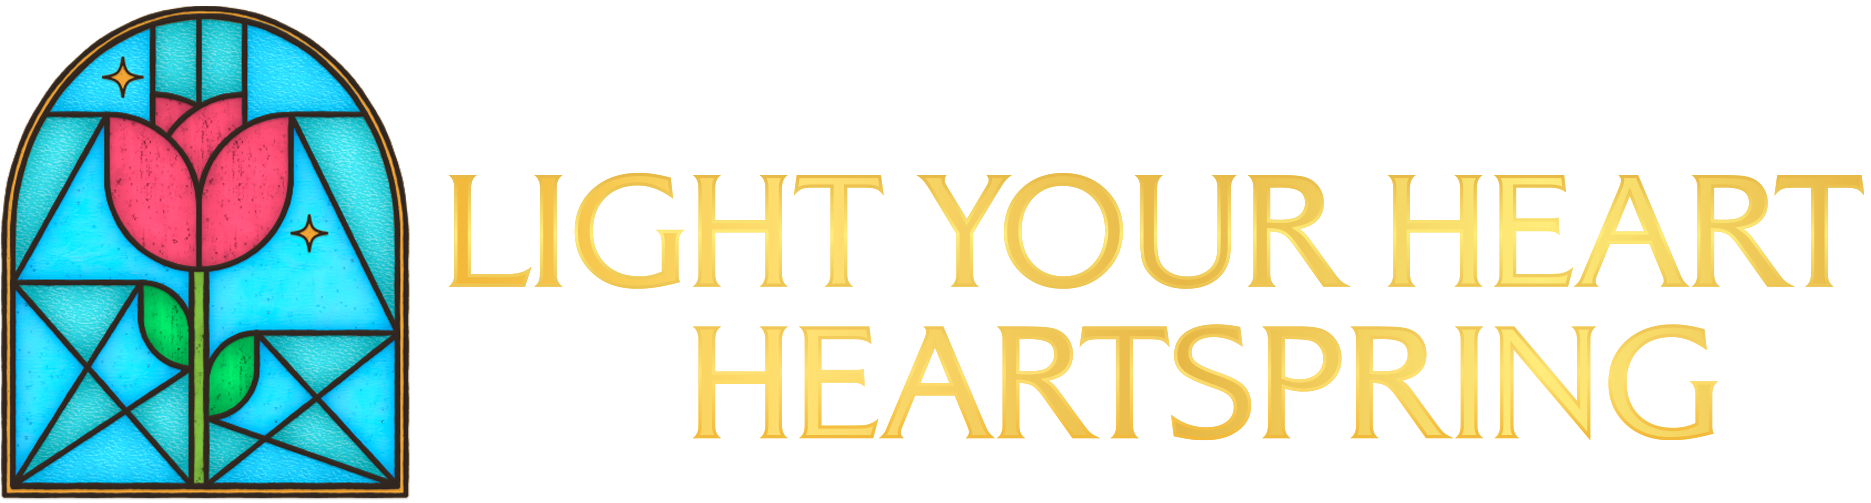 Light Your Heart with Heartspring